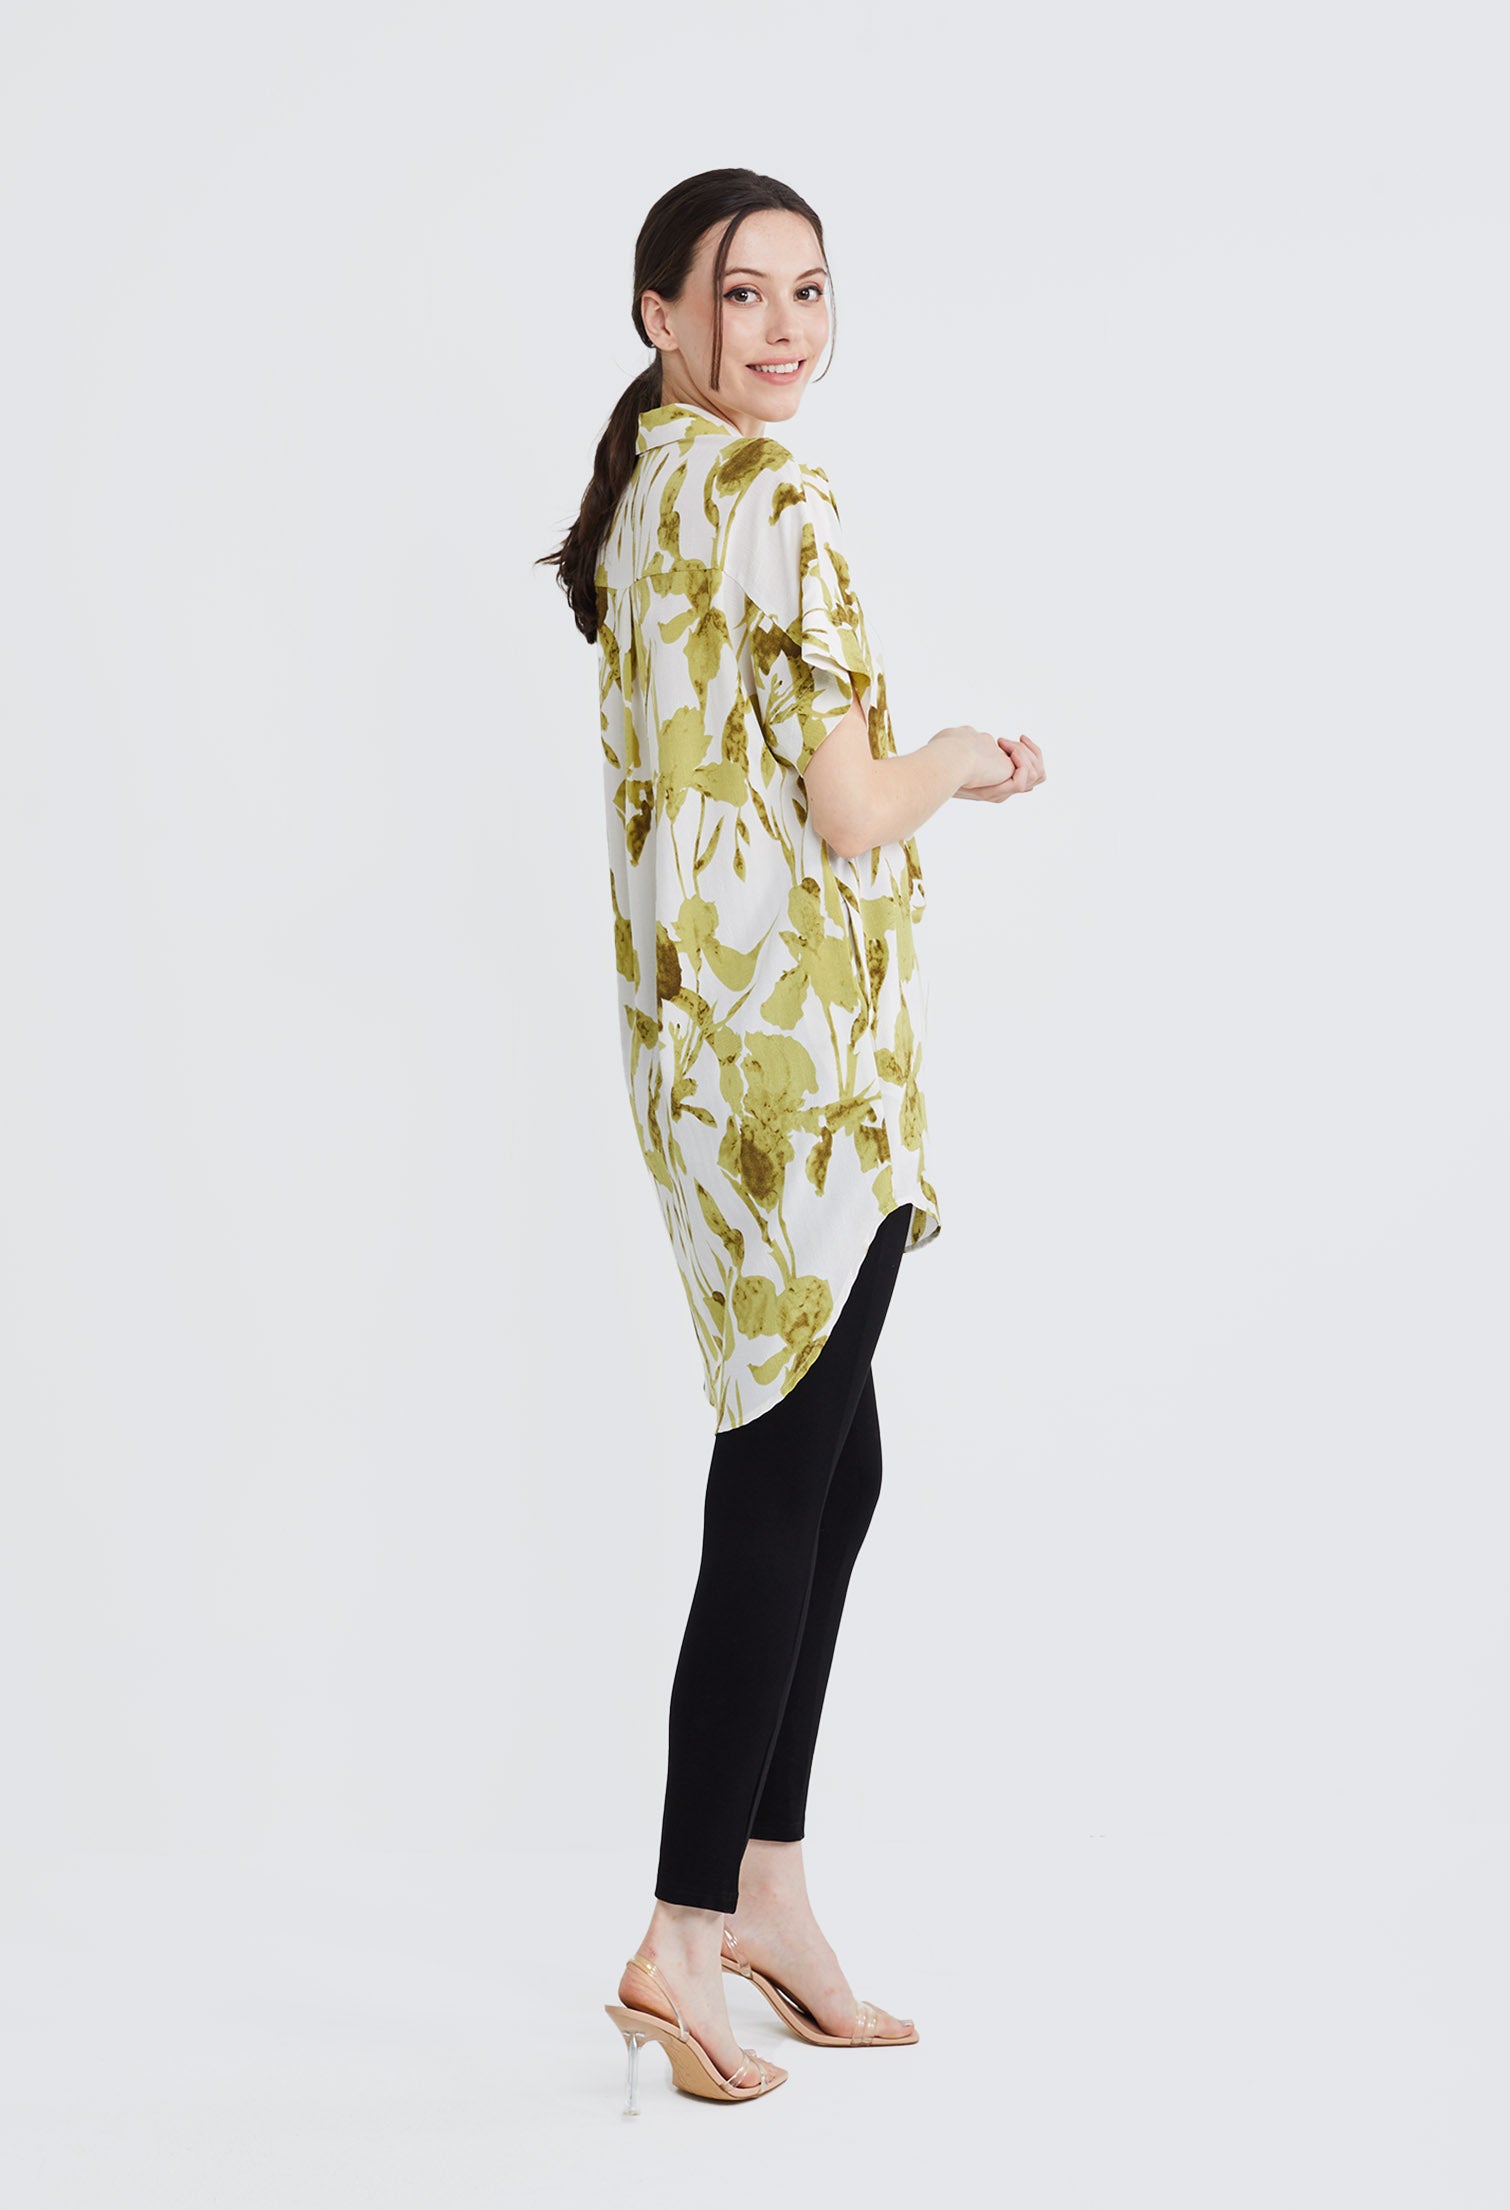 Scattered Floral Twine Tunic Shirt Dress